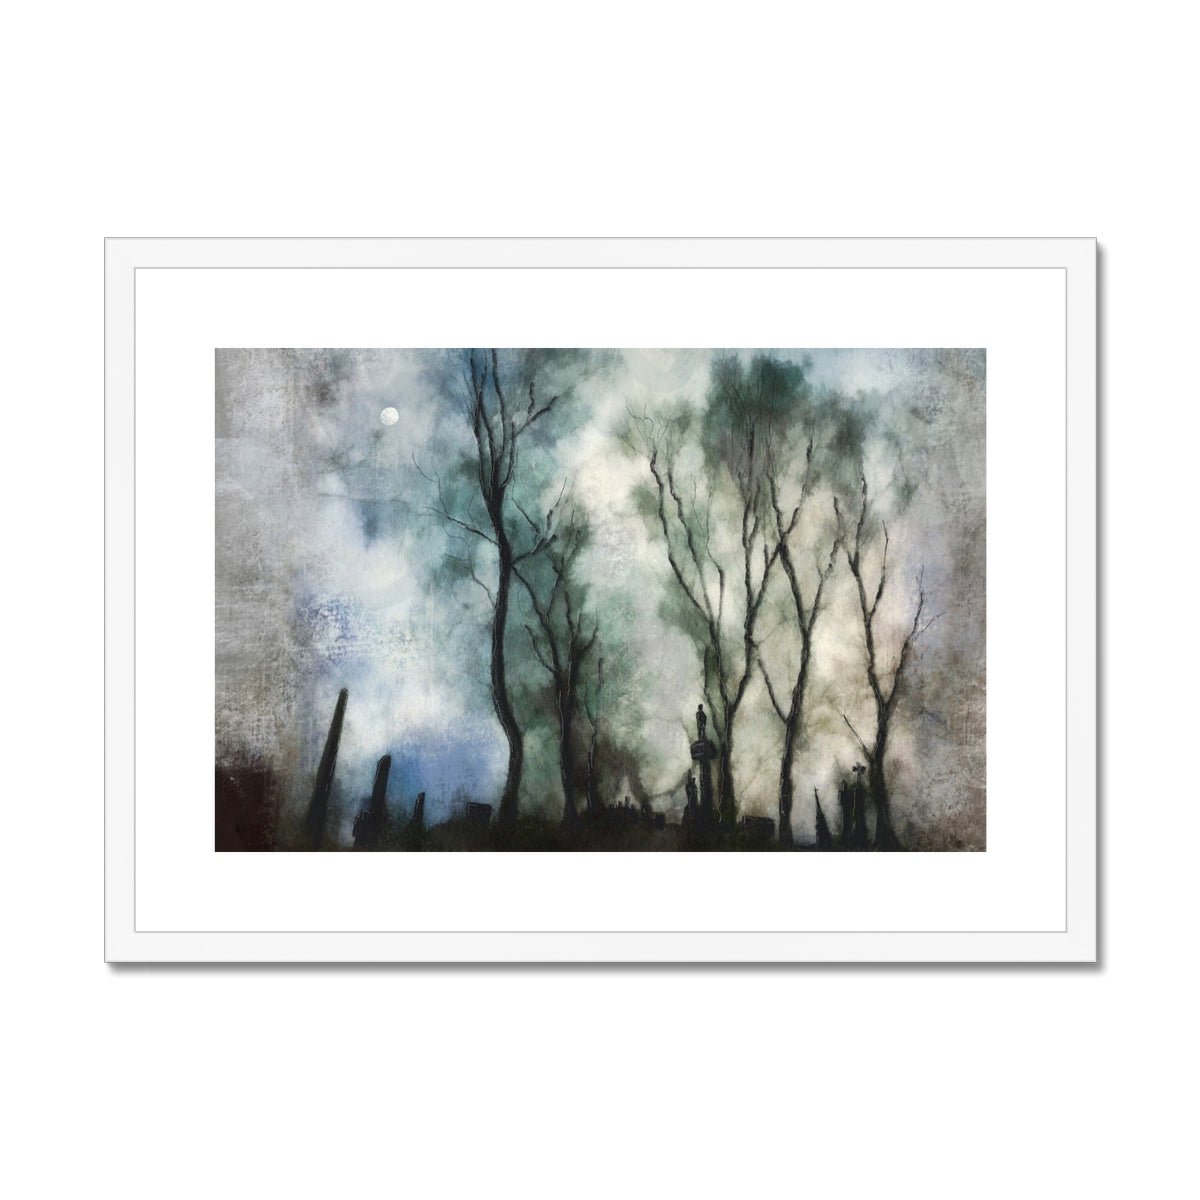 Glasgow Necropolis Moonlight Painting | Framed & Mounted Prints From Scotland-Framed & Mounted Prints-Edinburgh & Glasgow Art Gallery-A2 Landscape-White Frame-Paintings, Prints, Homeware, Art Gifts From Scotland By Scottish Artist Kevin Hunter